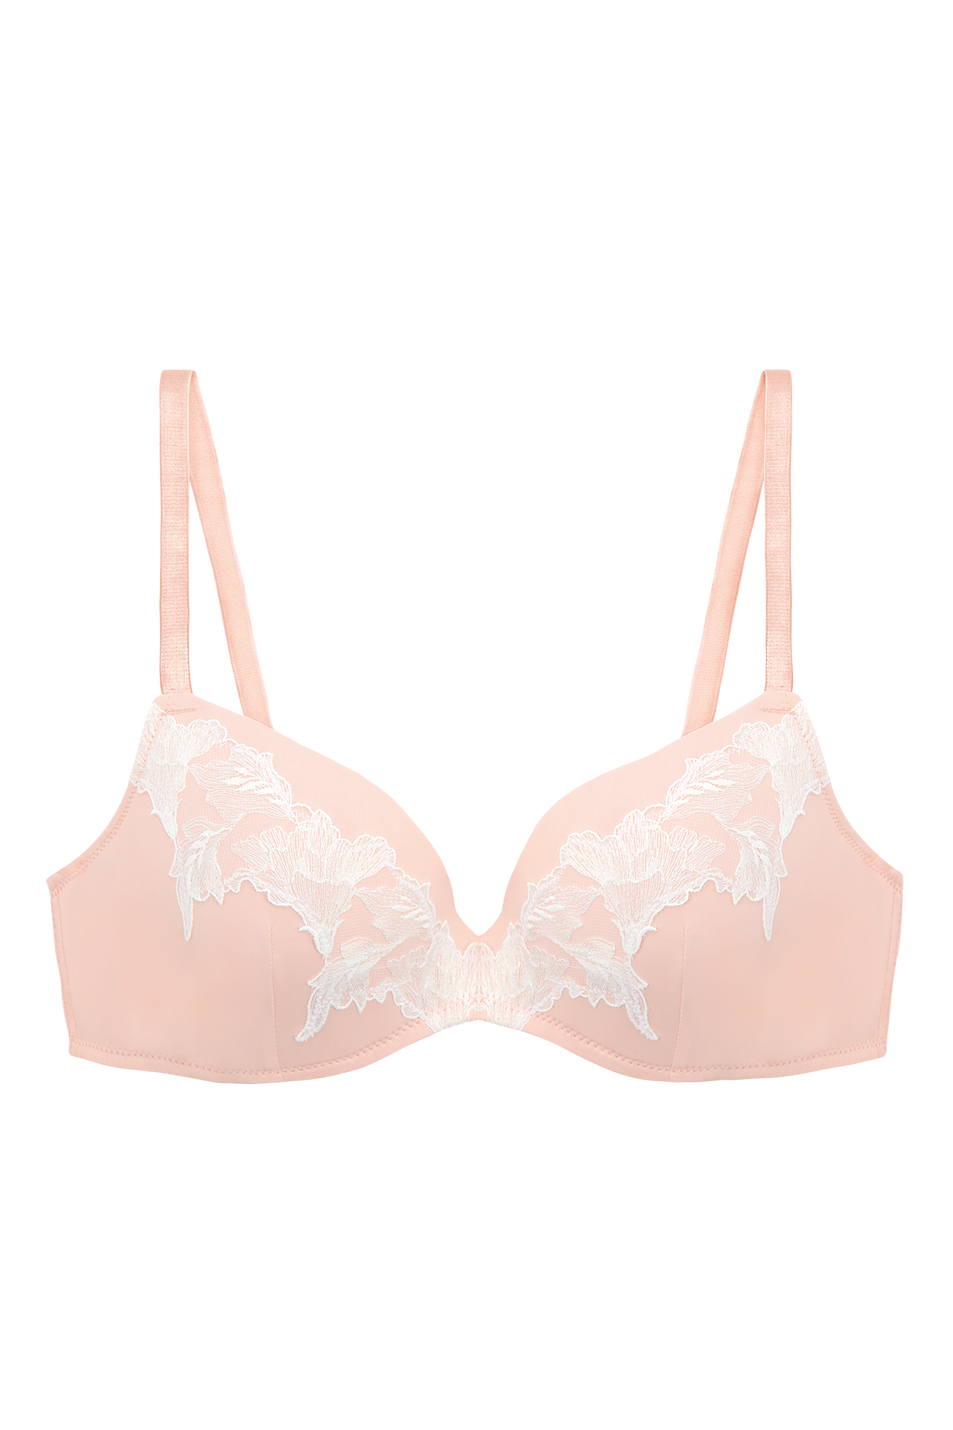 Buy LOVERS CONTOUR BRA online at Intimo